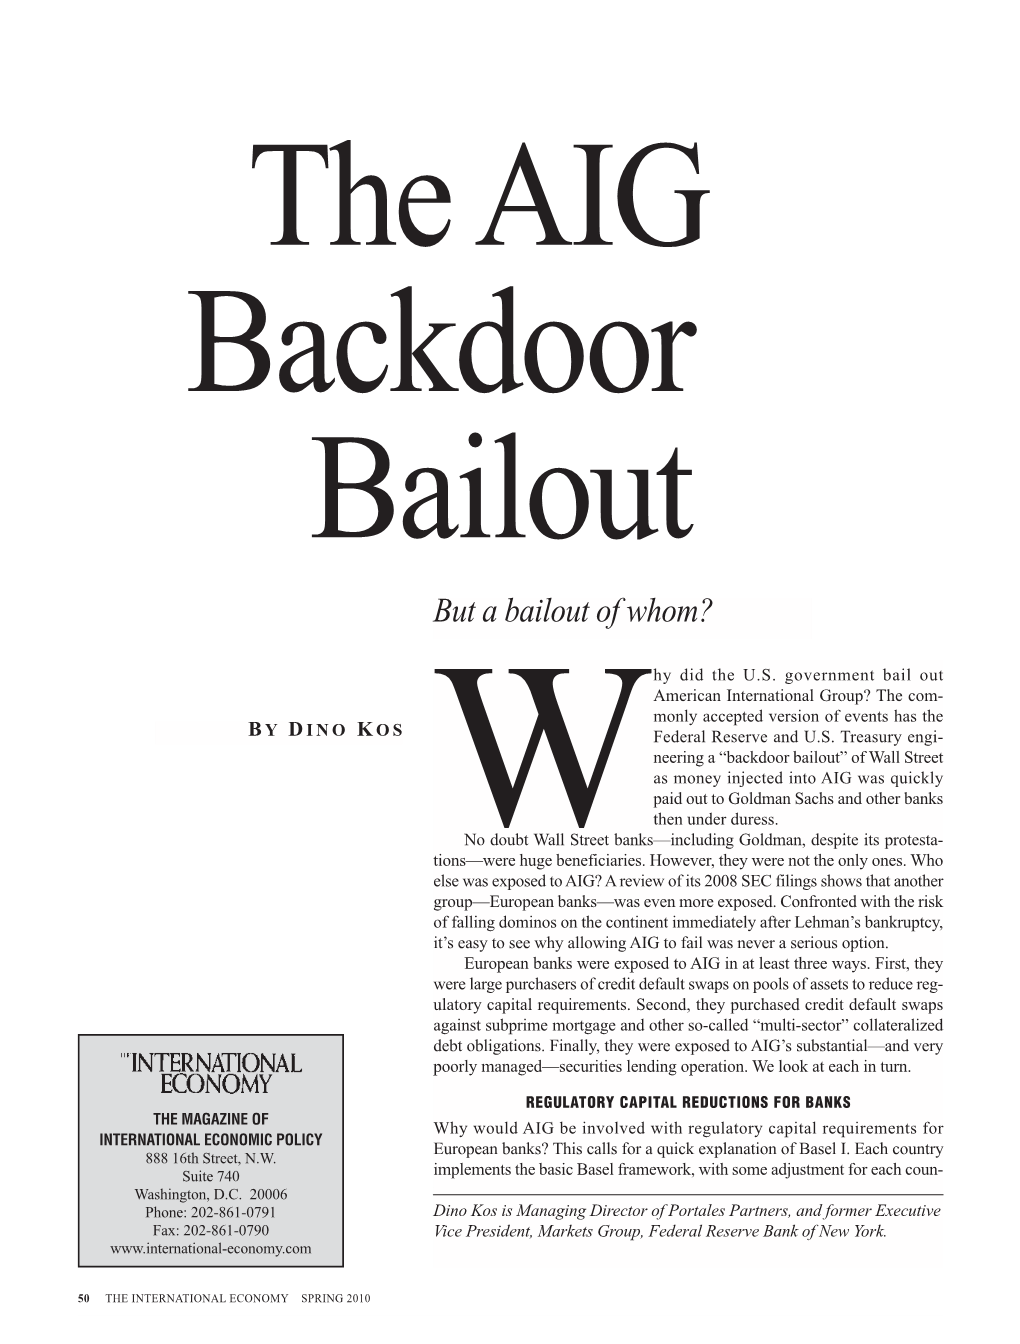 The AIG Backdoor Bailout but a Bailout of Whom?